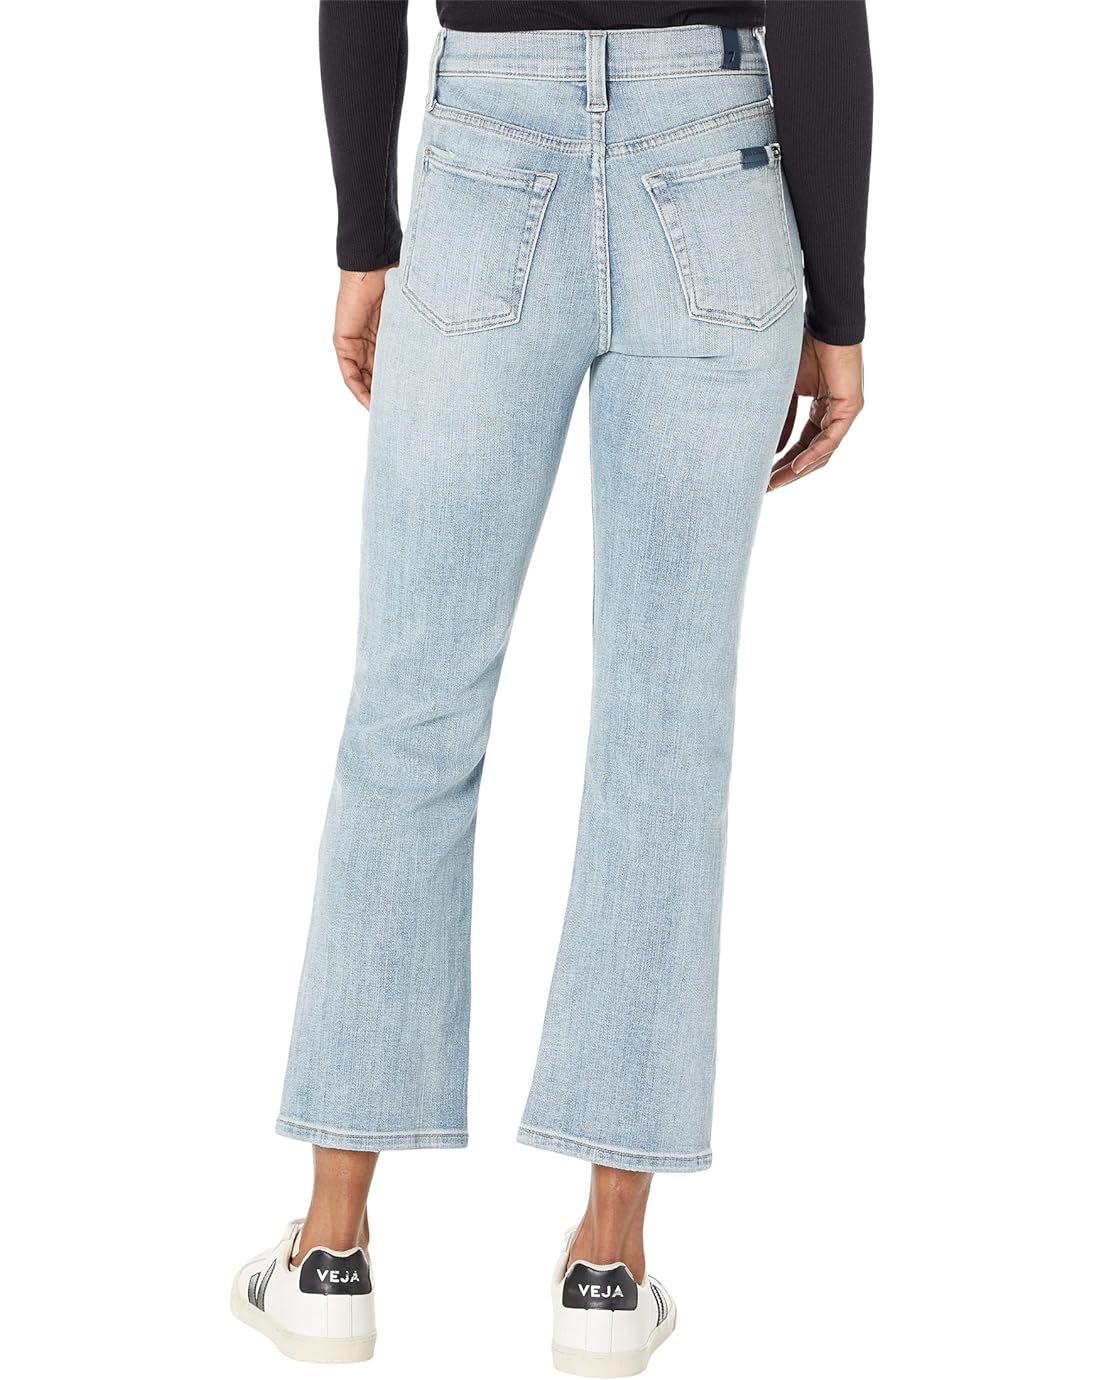  7 For All Mankind High-Waisted Slim Kick in Broken Twill Briar